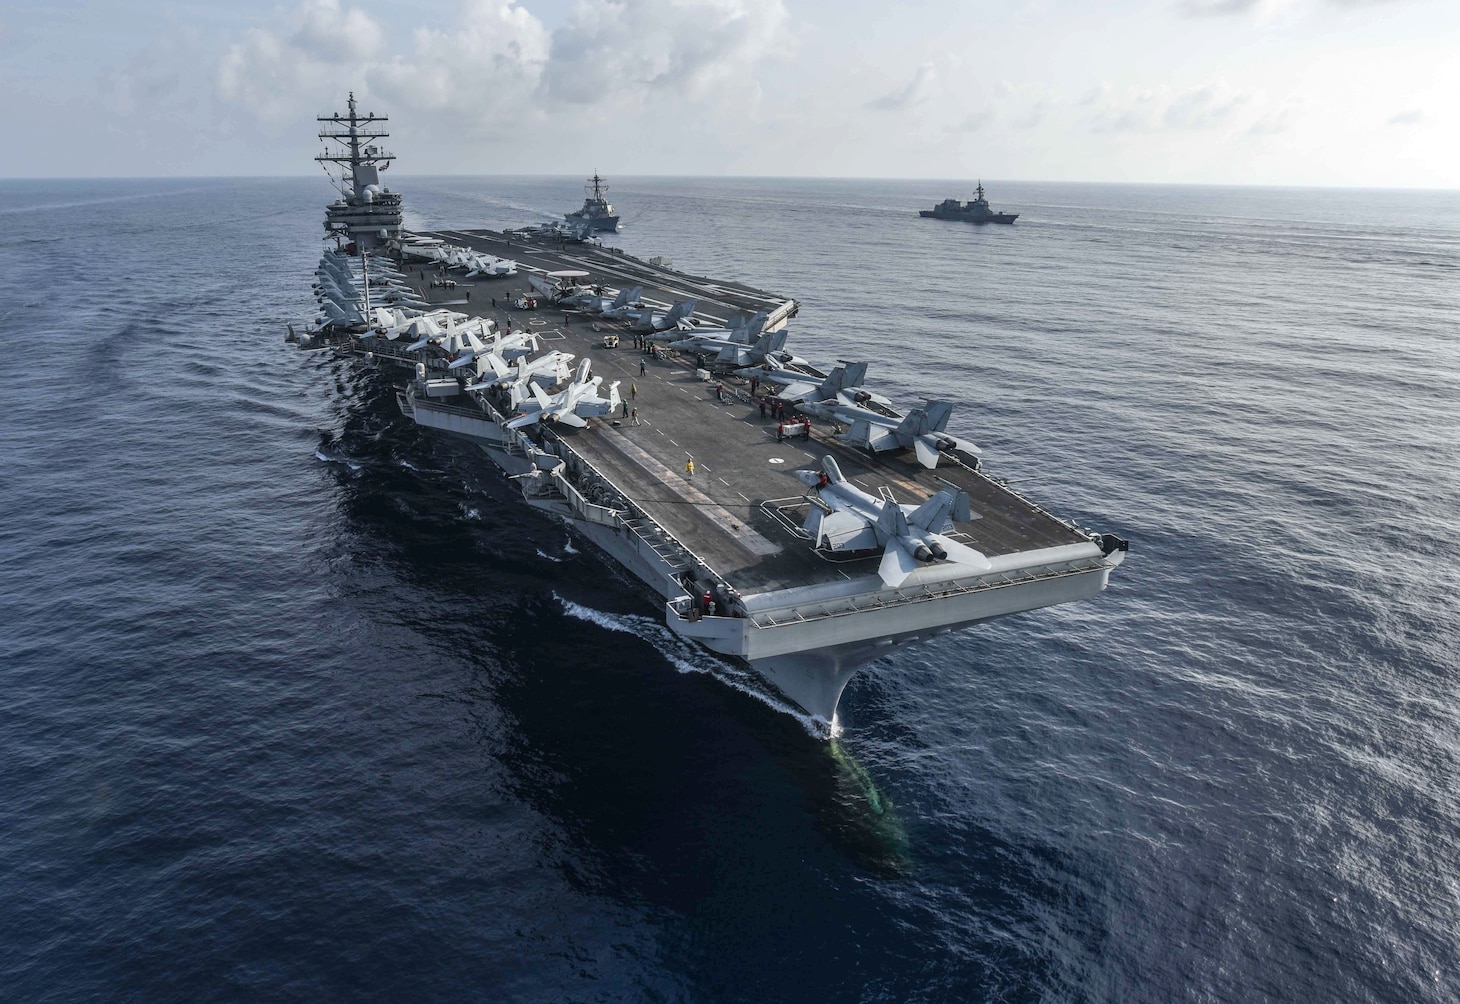 SOUTH CHINA SEA (Aug. 31, 2018) The aircraft carrier USS Ronald Reagan (CVN 76) and the guided-missile destroyer USS Milius (DDG 69), center, conduct a photo exercise with Japan Maritime Self-Defense Force ships. The Ronald Reagan Carrier Strike Group is forward-deployed to the U.S. 7th Fleet area of operations in support of security and stability in the Indo-Pacific region.